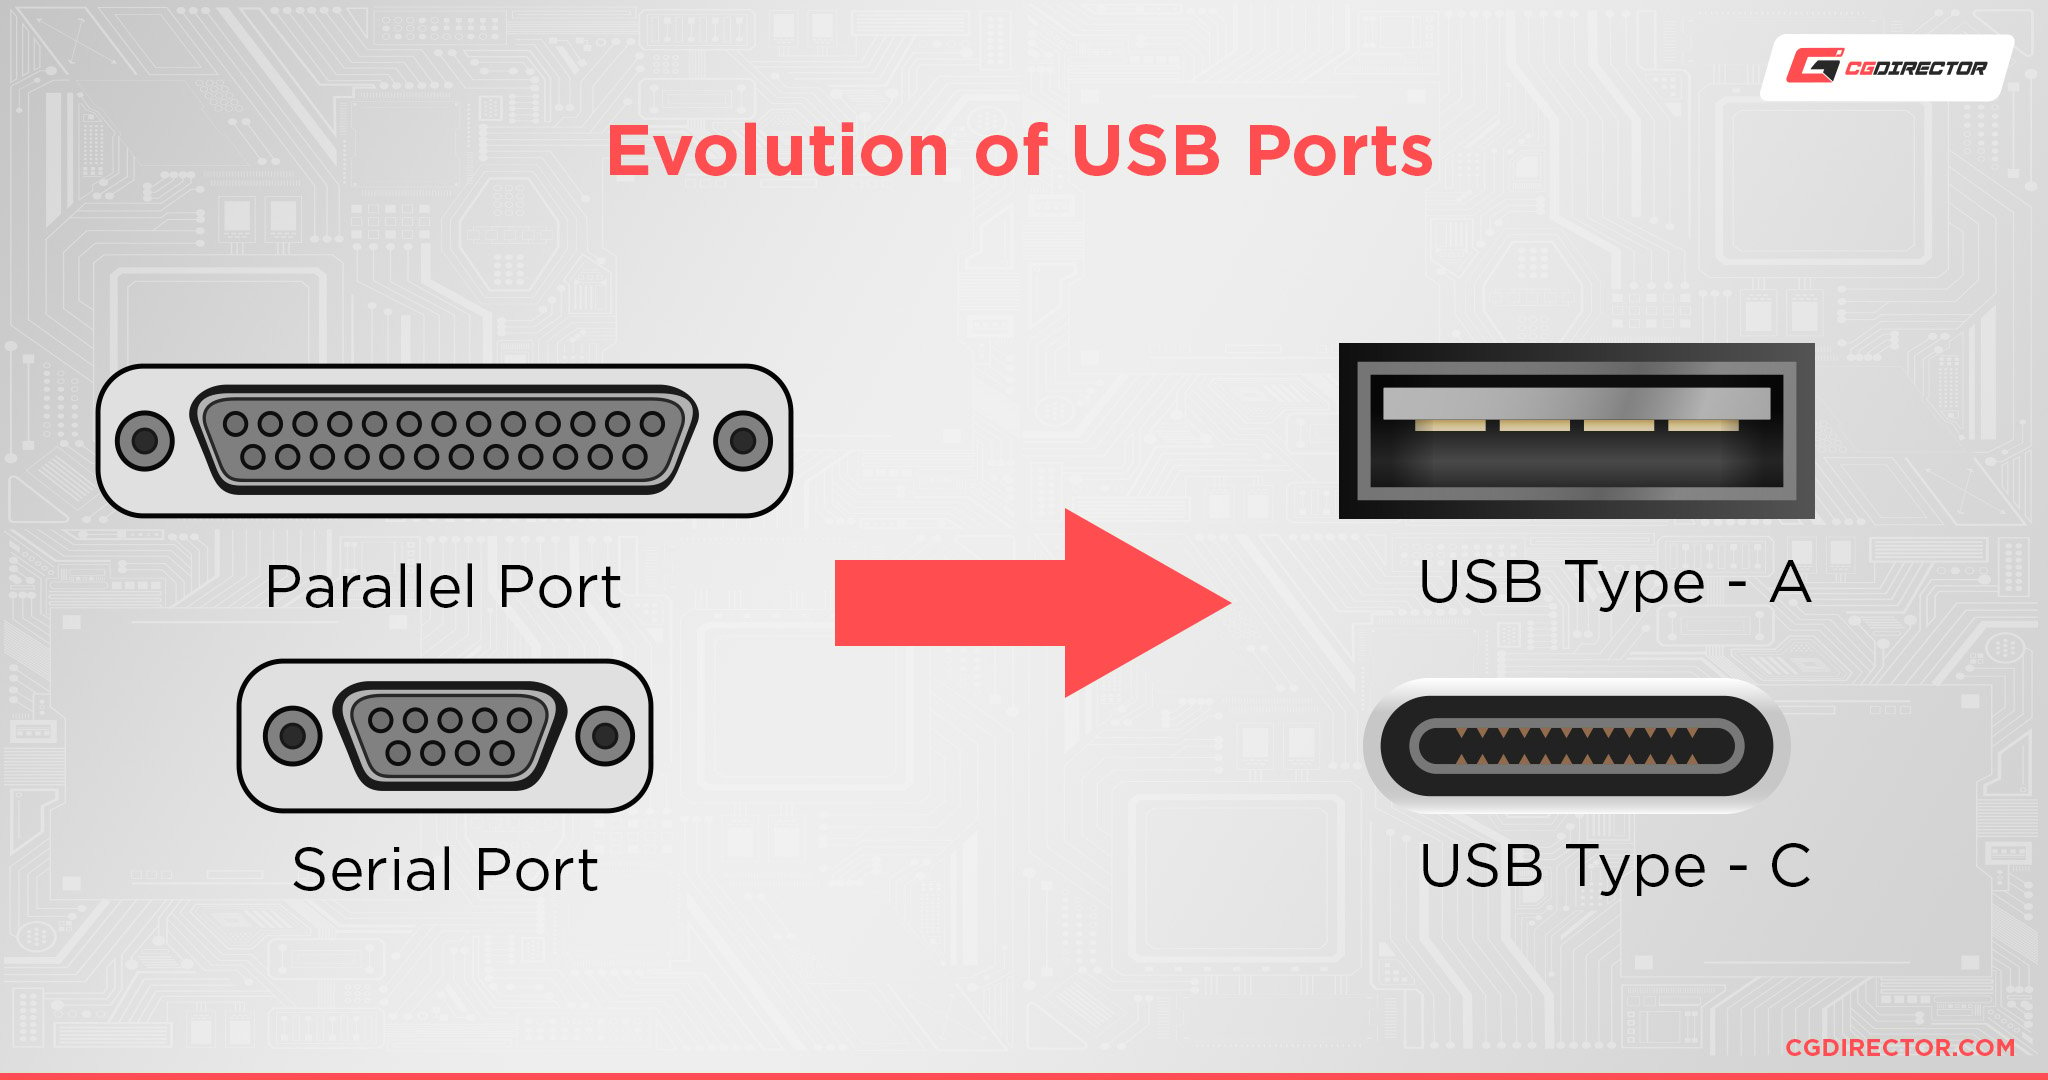 All Types USB Explained & How to them